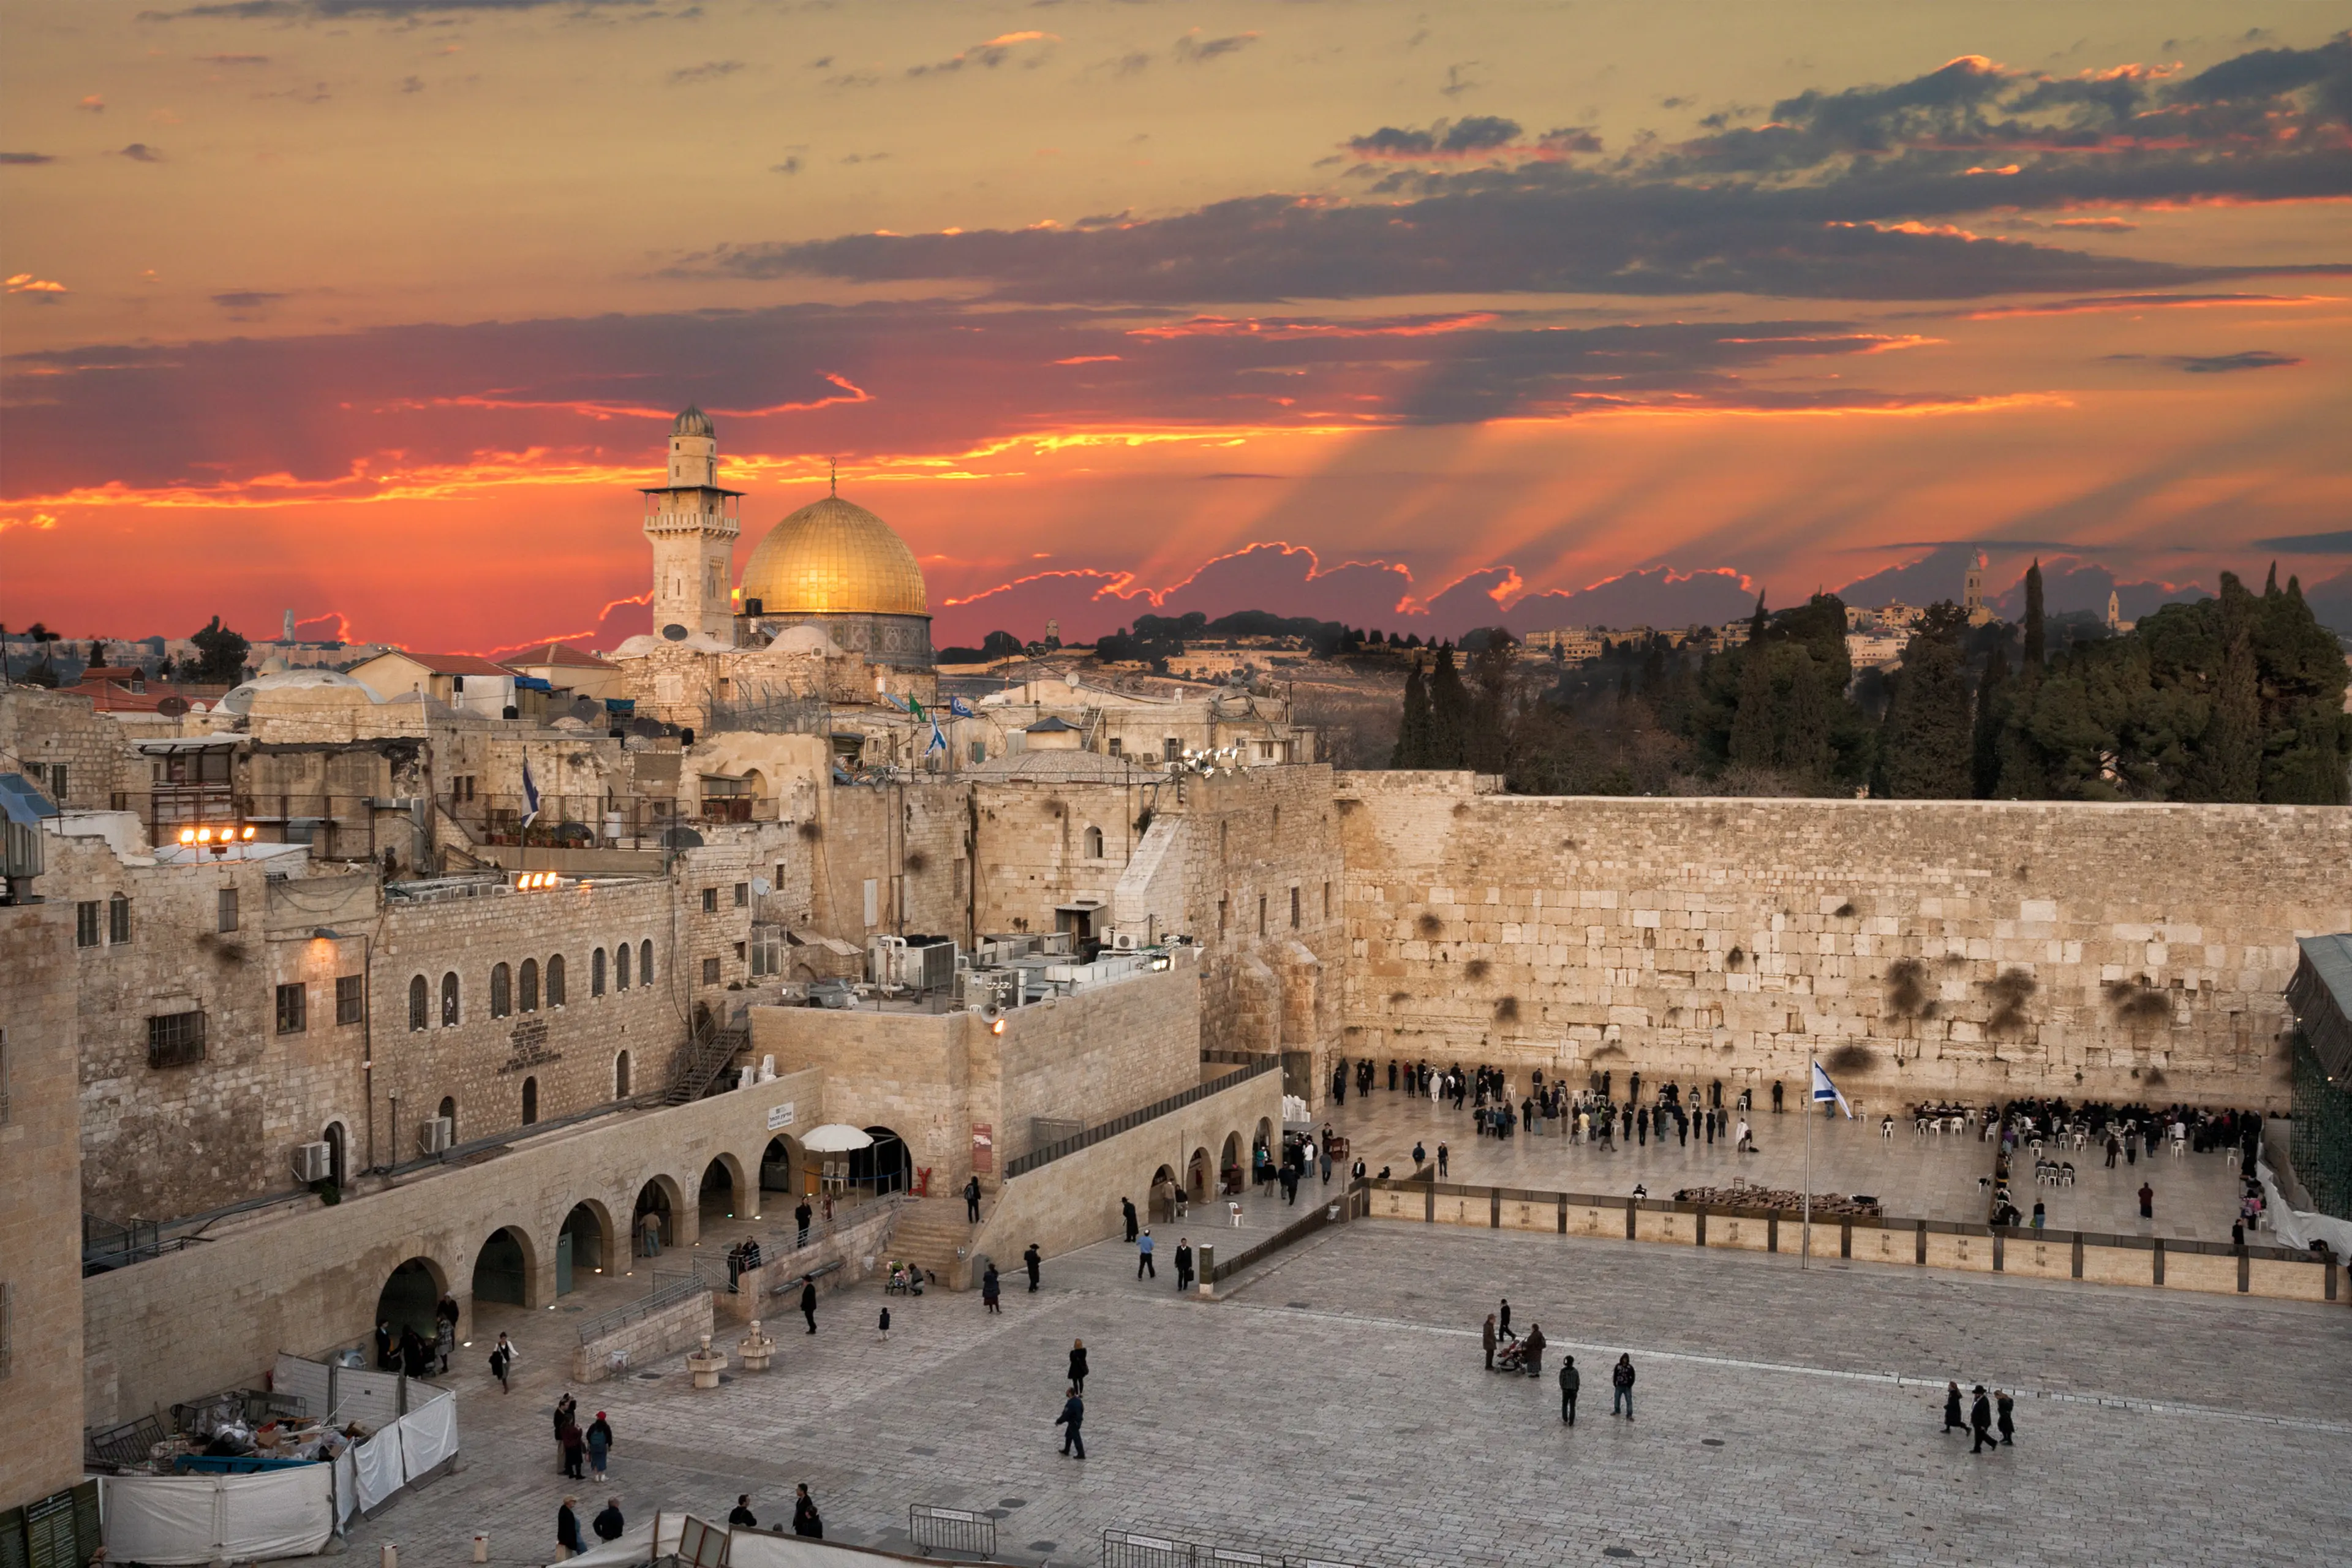 The Western Wall at the Temple Mount